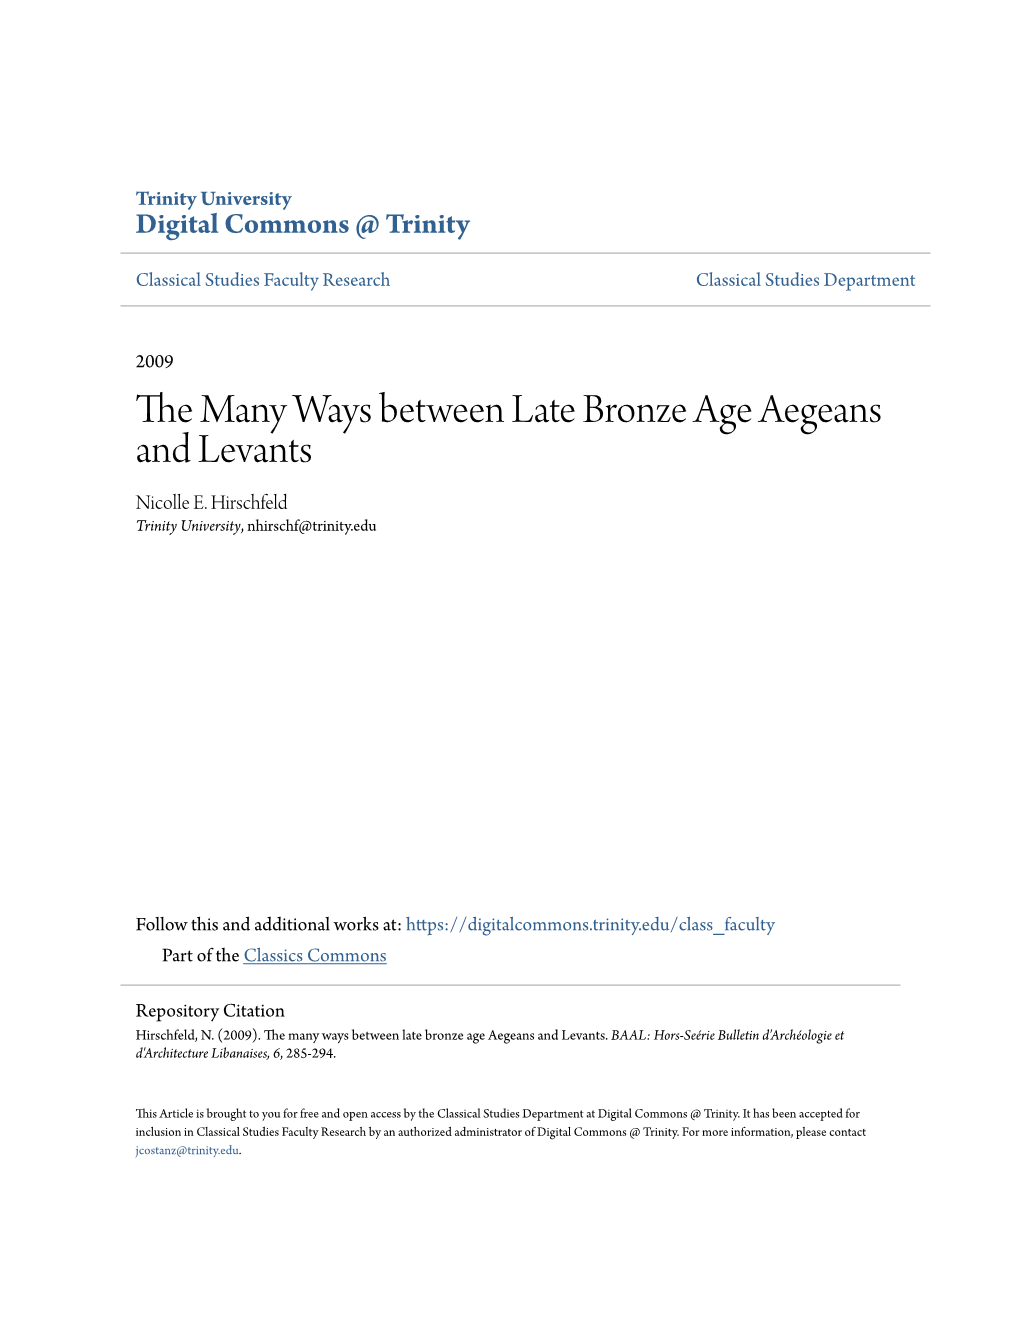 The Many Ways Between Late Bronze Age Aegeans and Levants